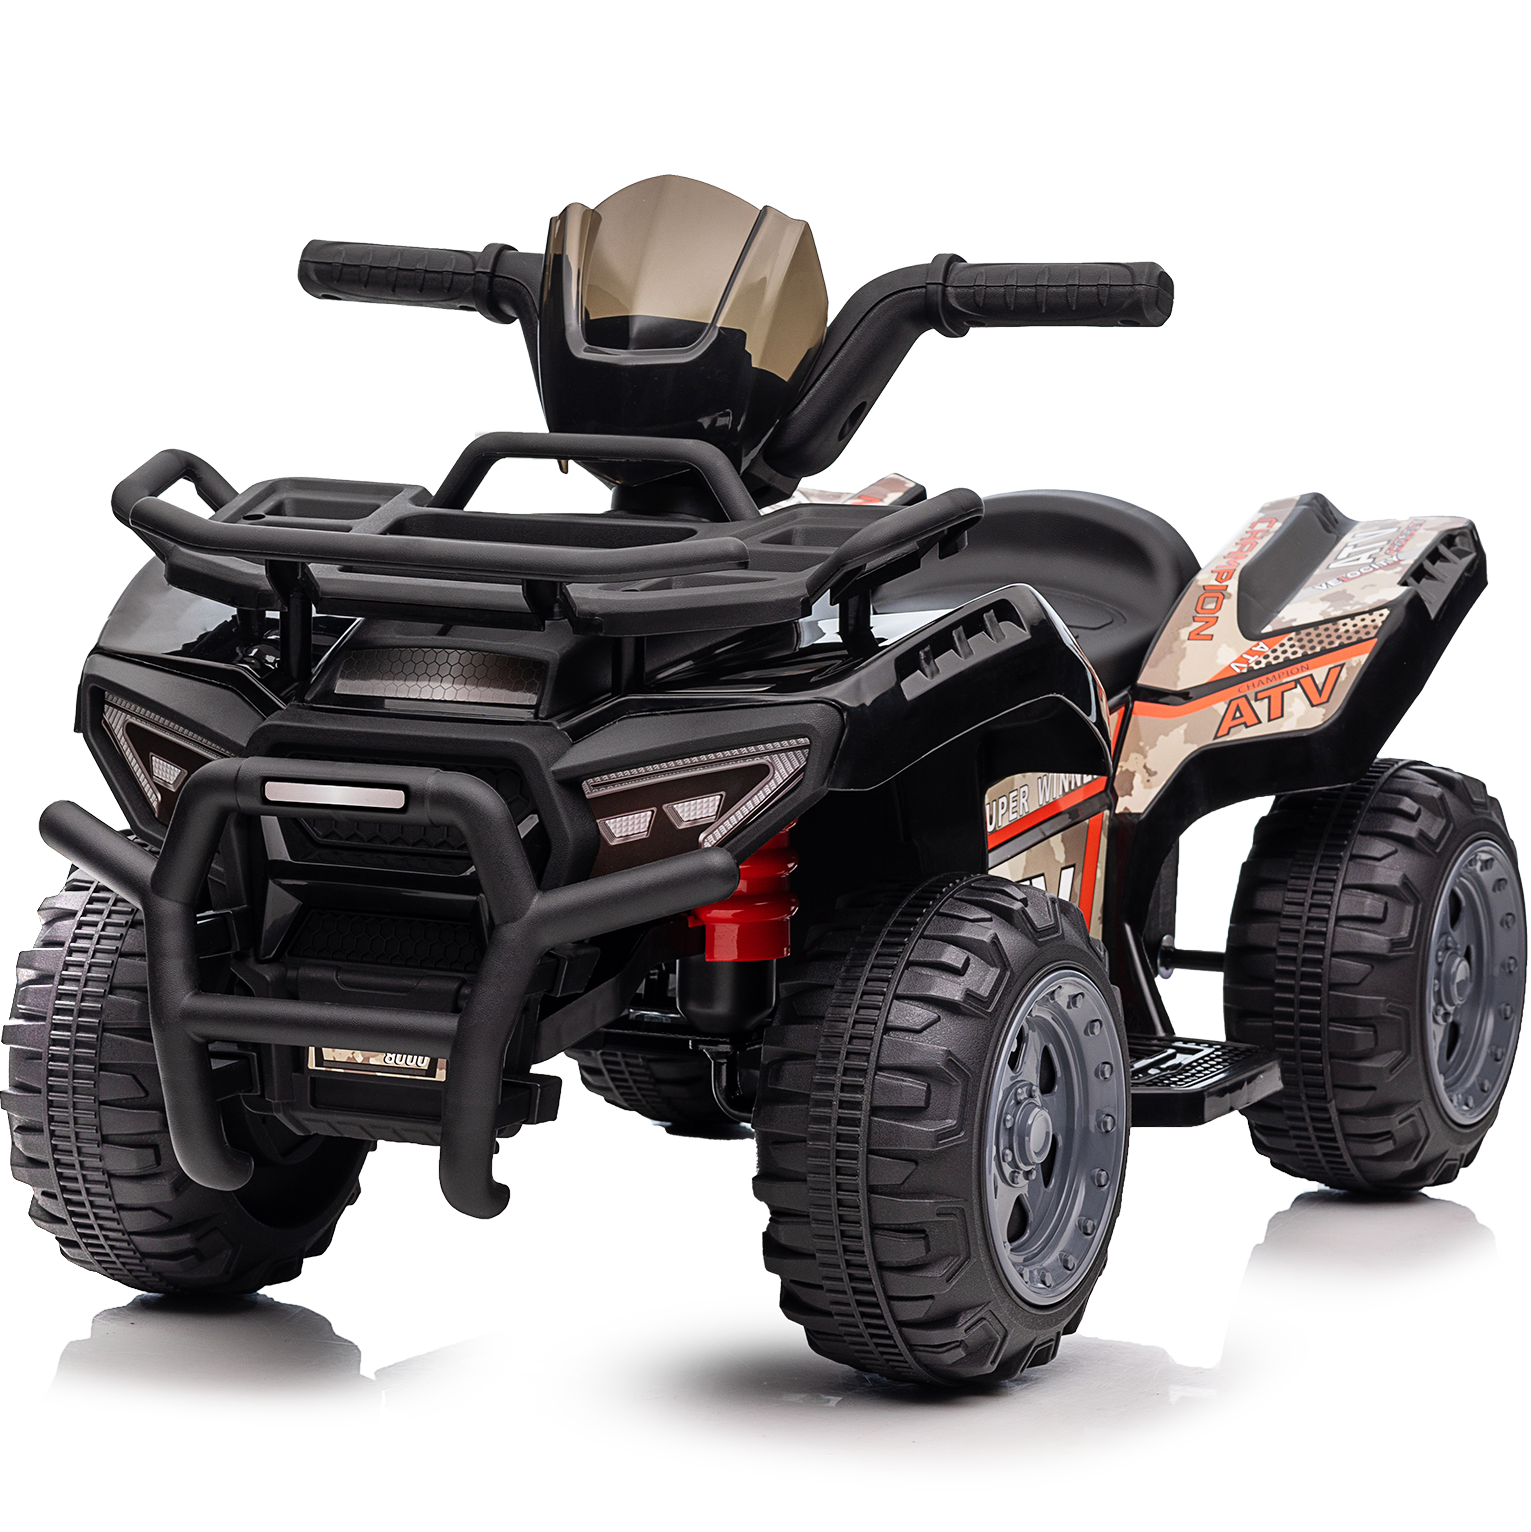 Hikiddo 6V Ride-on Toy for Toddlers, Kids ATV 4 Wheeler for 1-3 Boys & Girls with Music - Black - image 1 of 8